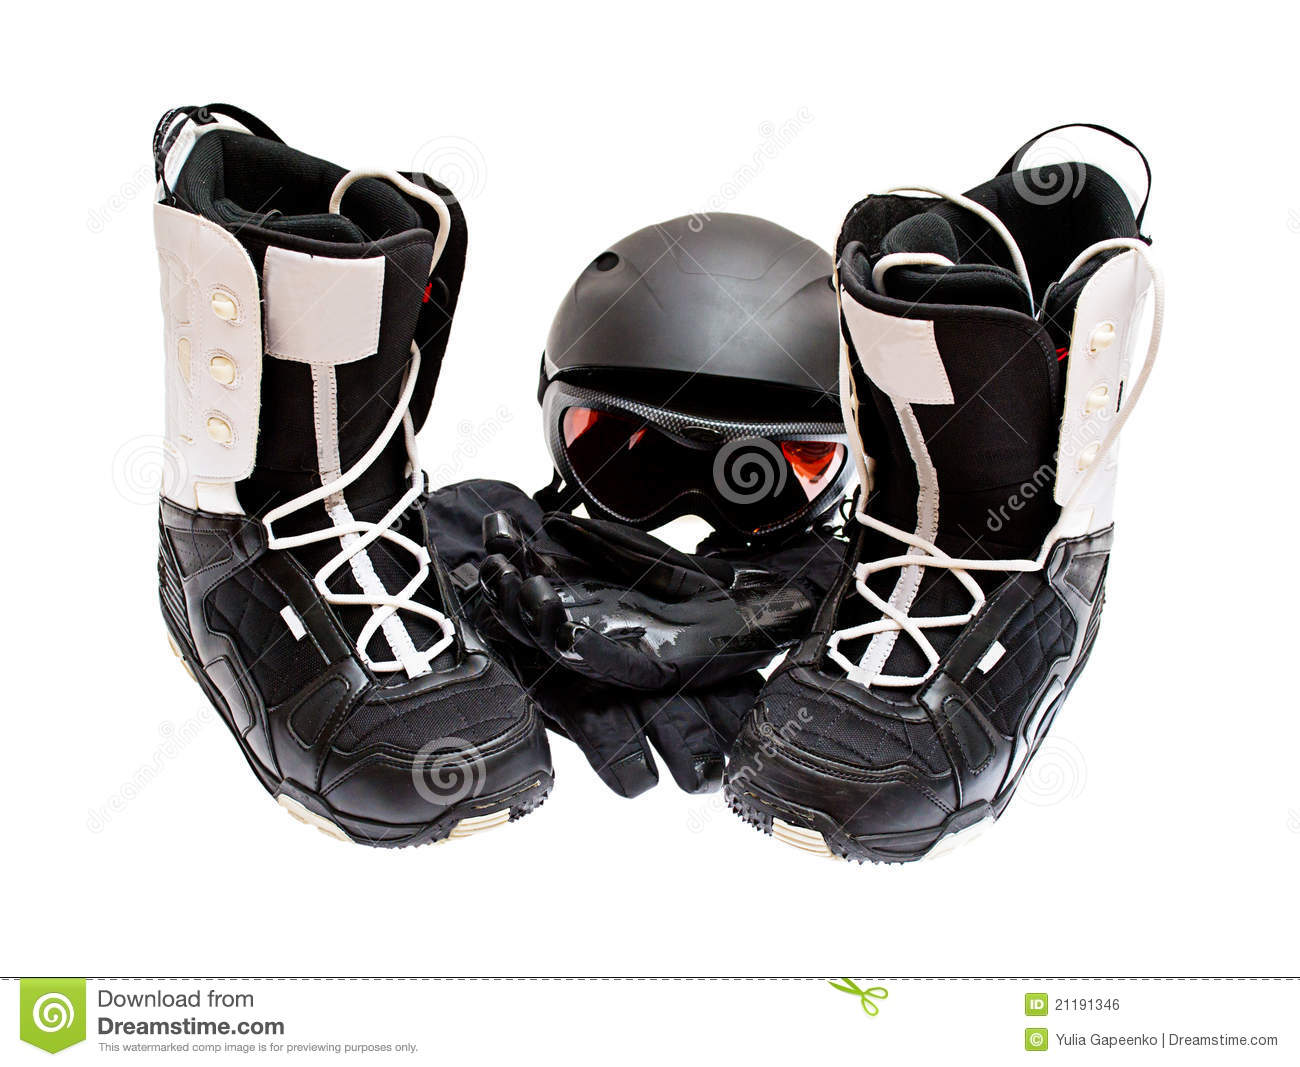 Snowboard Boots Helmet Gloves Glasses Royalty Free Stock Image